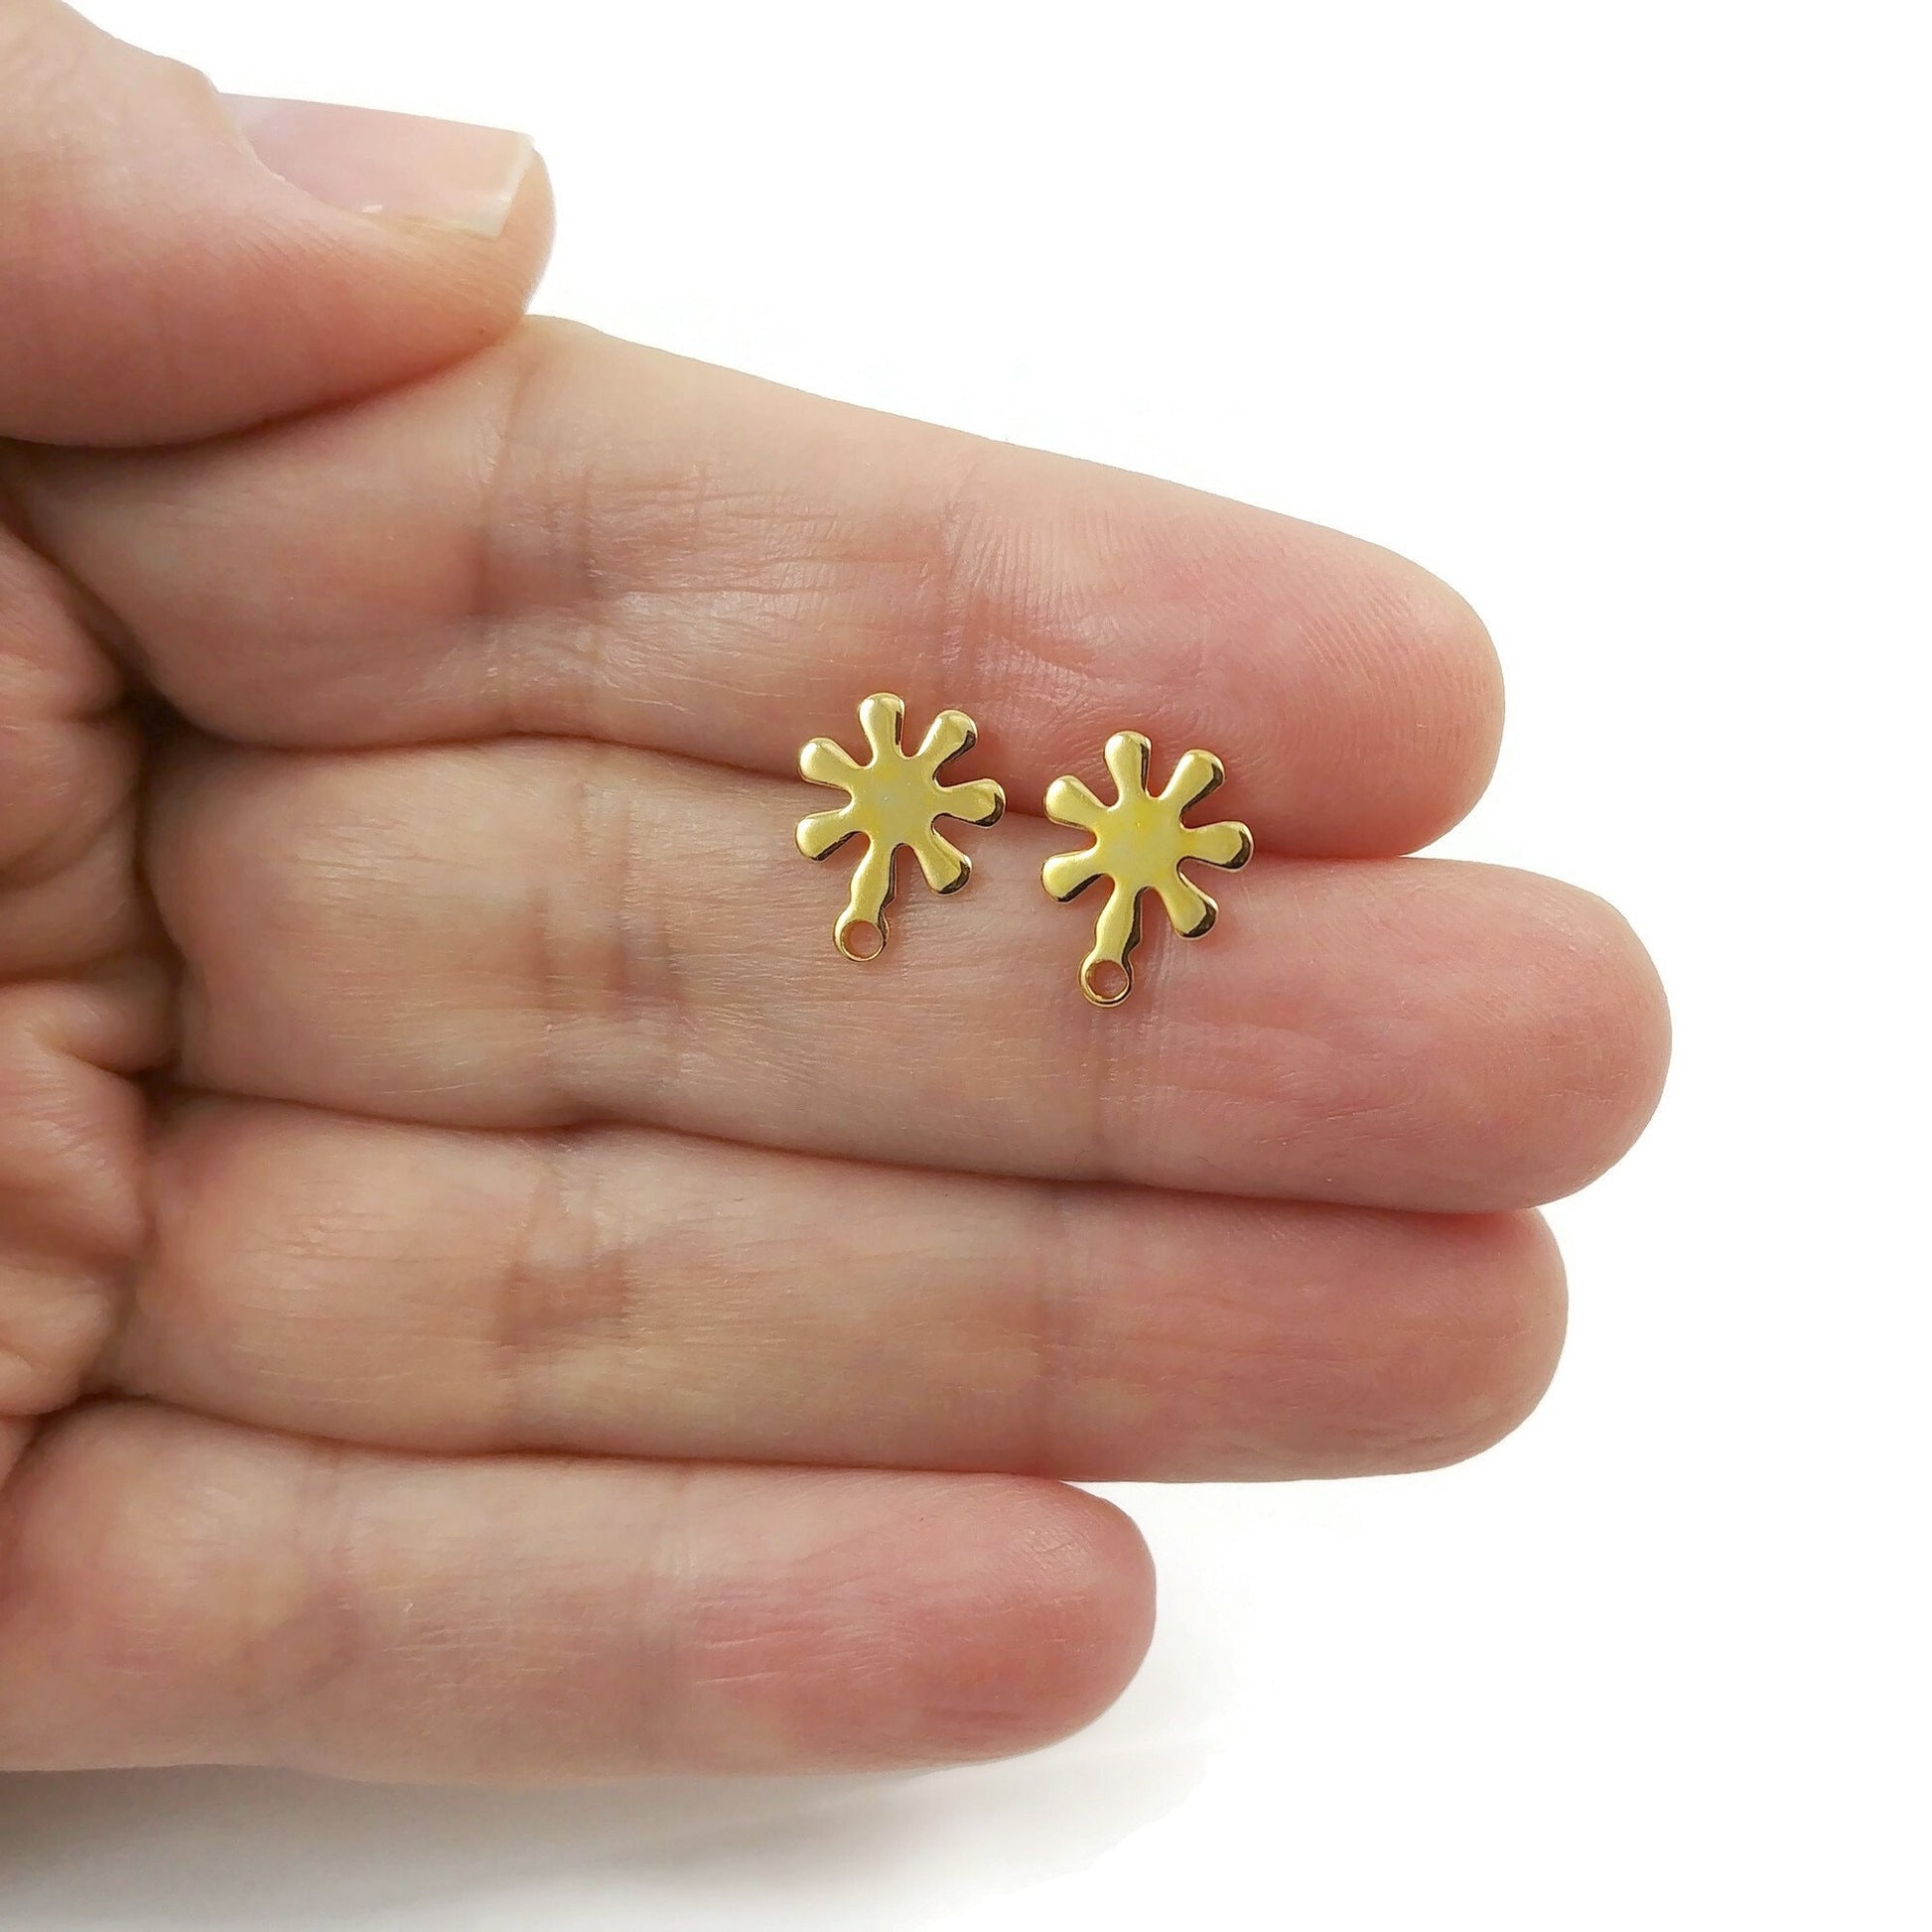 9mm flower ear studs with loop, Stainless steel earring posts, Hypoallergenic gold or silver jewelry findings